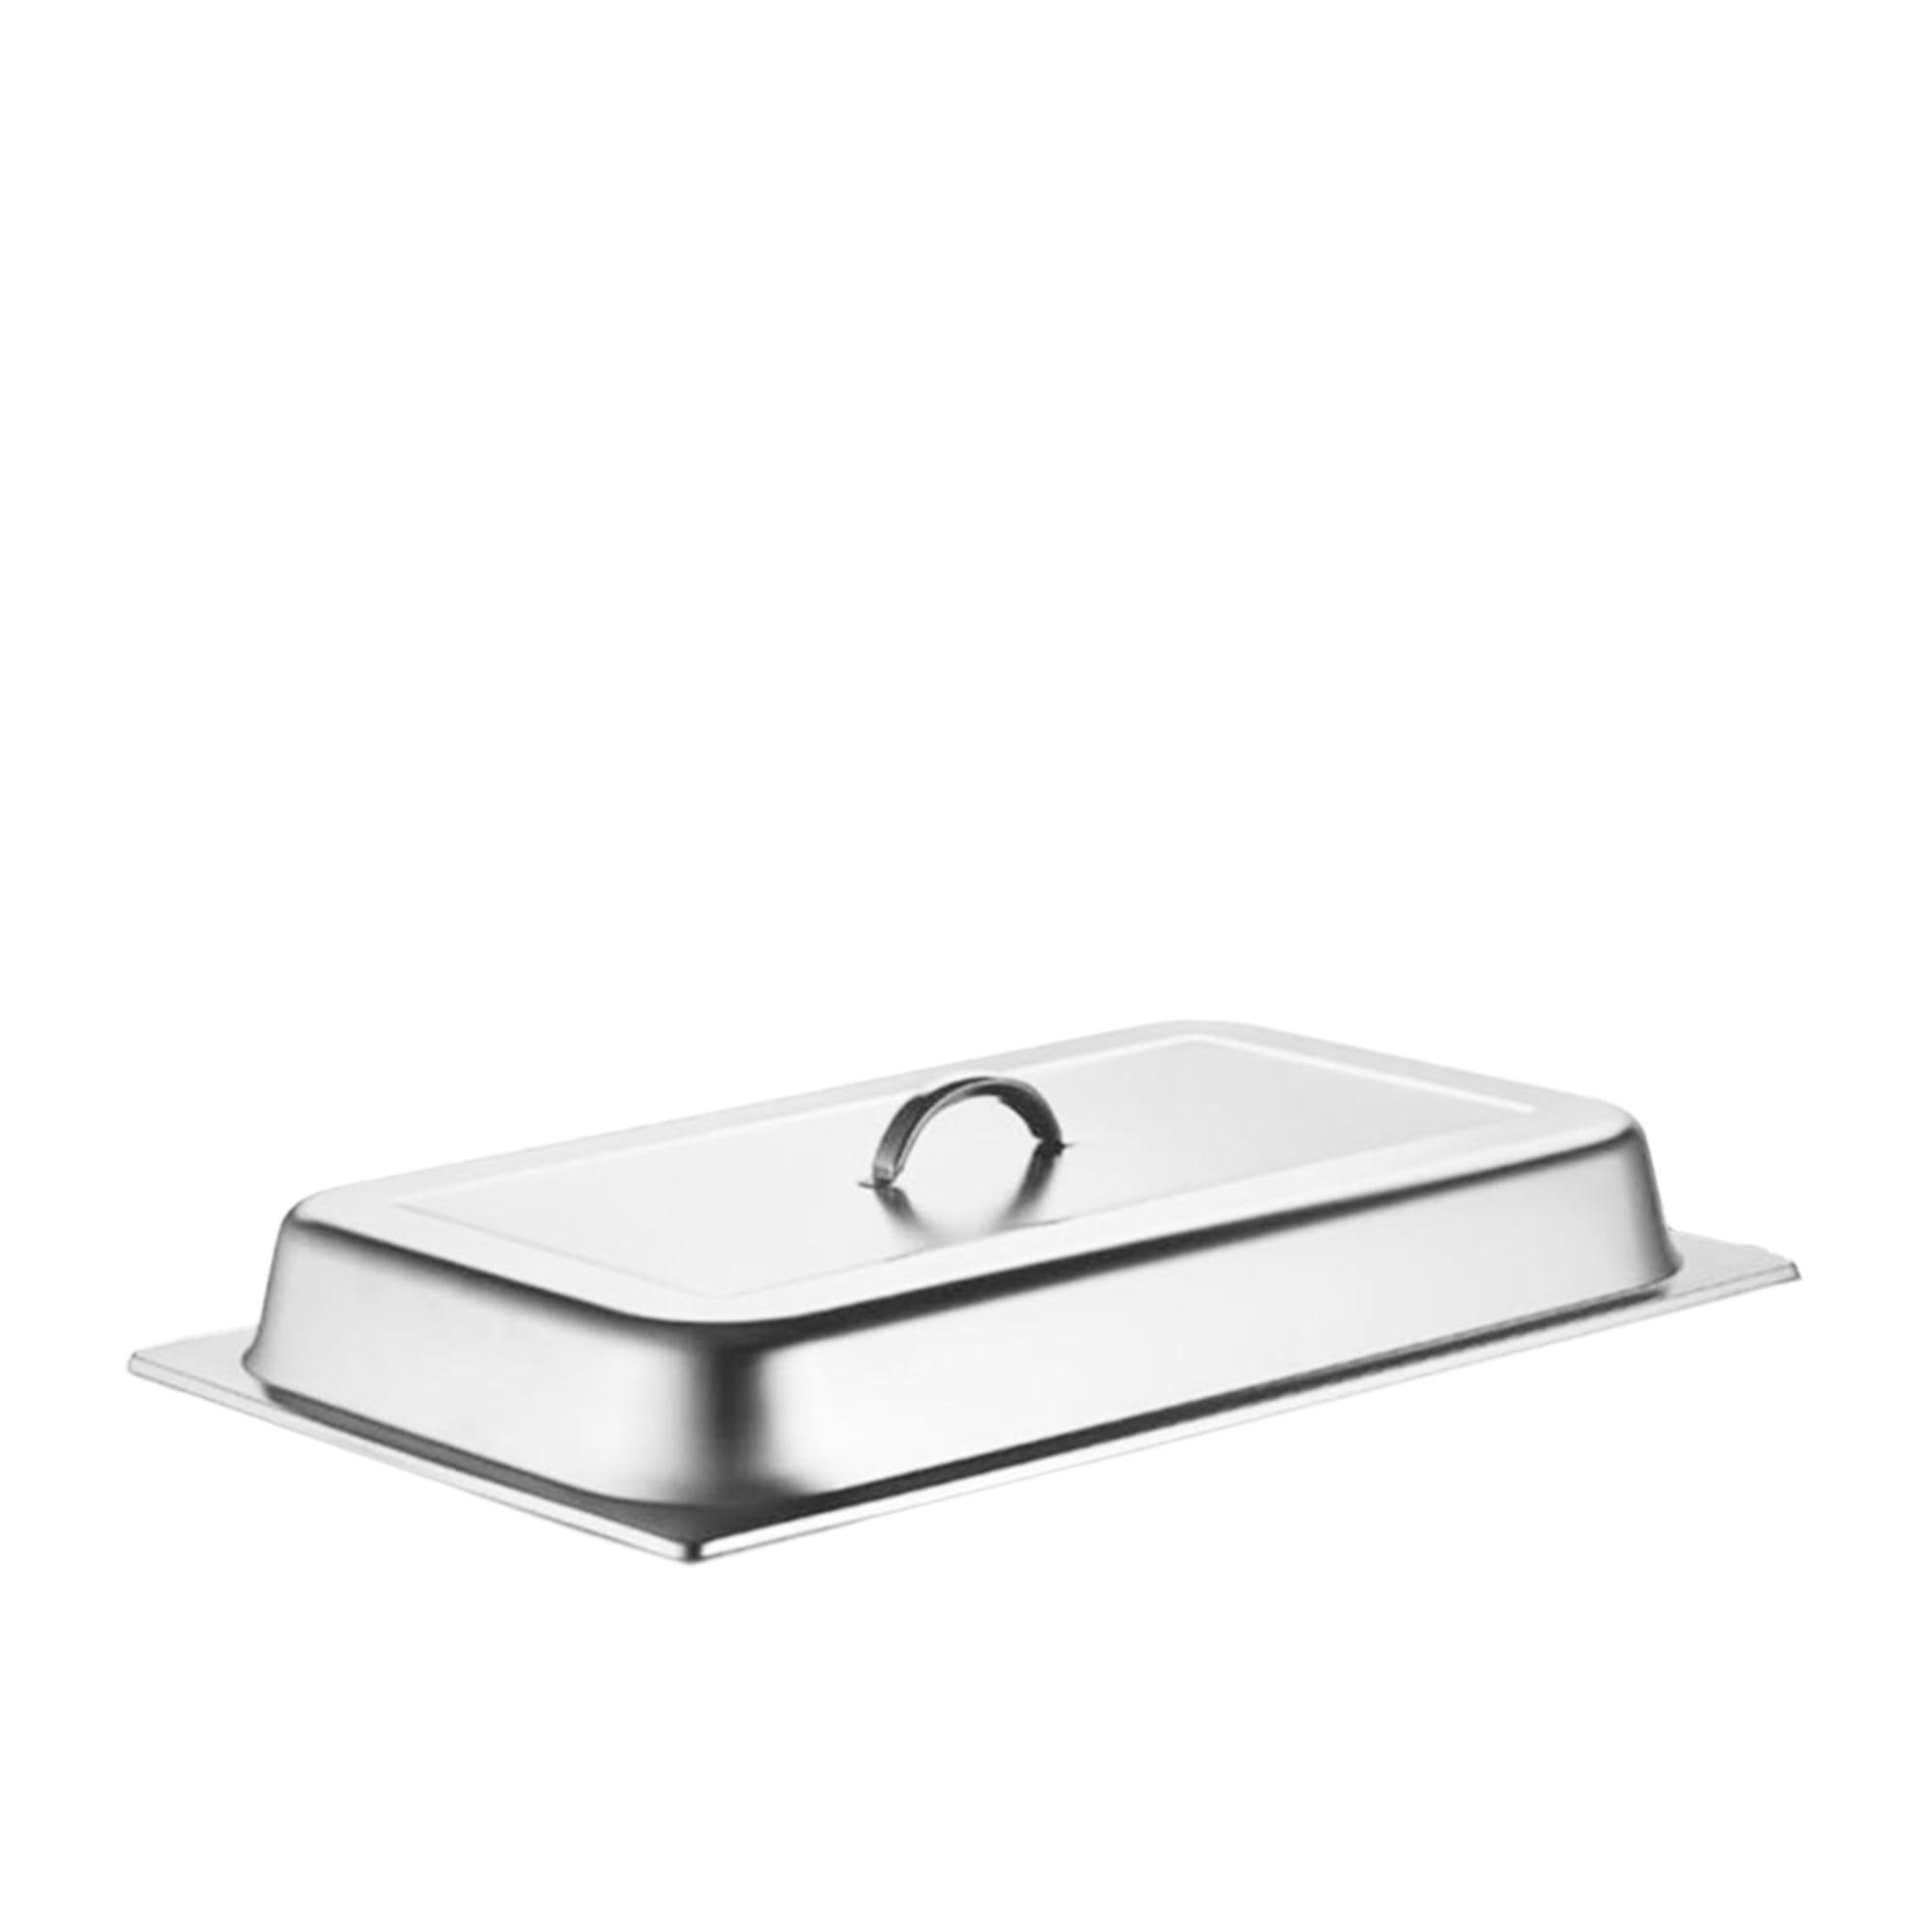 Soga Rectangular Stainless Steel Chafing Dish with Lid Image 3